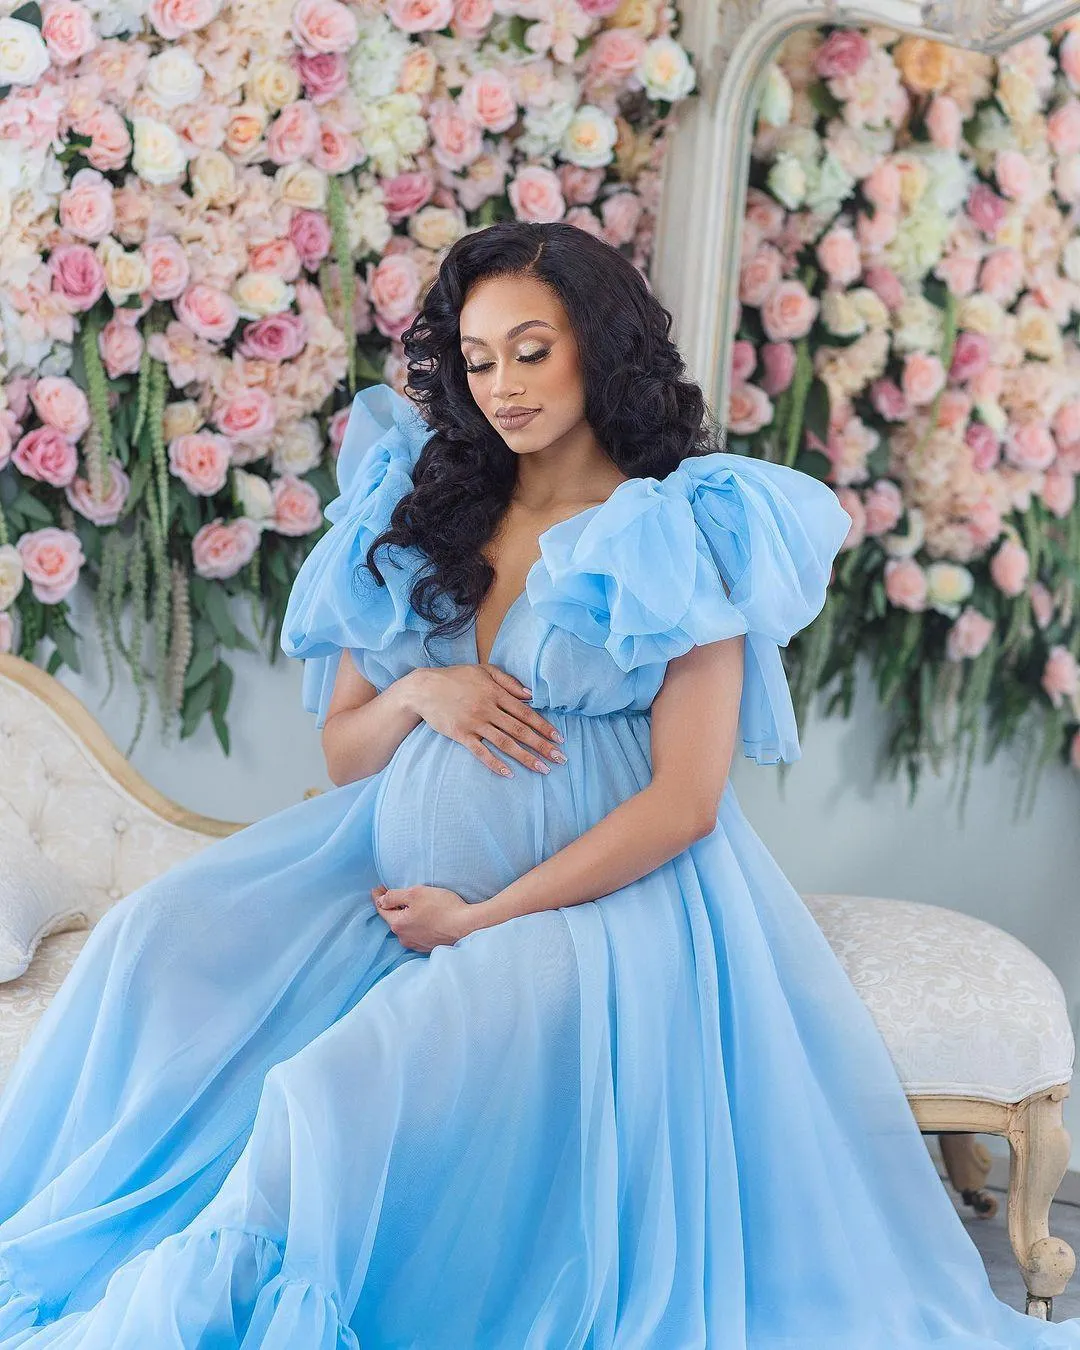 Plus Size Blue Ruffle Maternity Bridal Sleepwear Dress For Photoshoots,  Baby Showers, And Lingerie From Verycute, $34.26